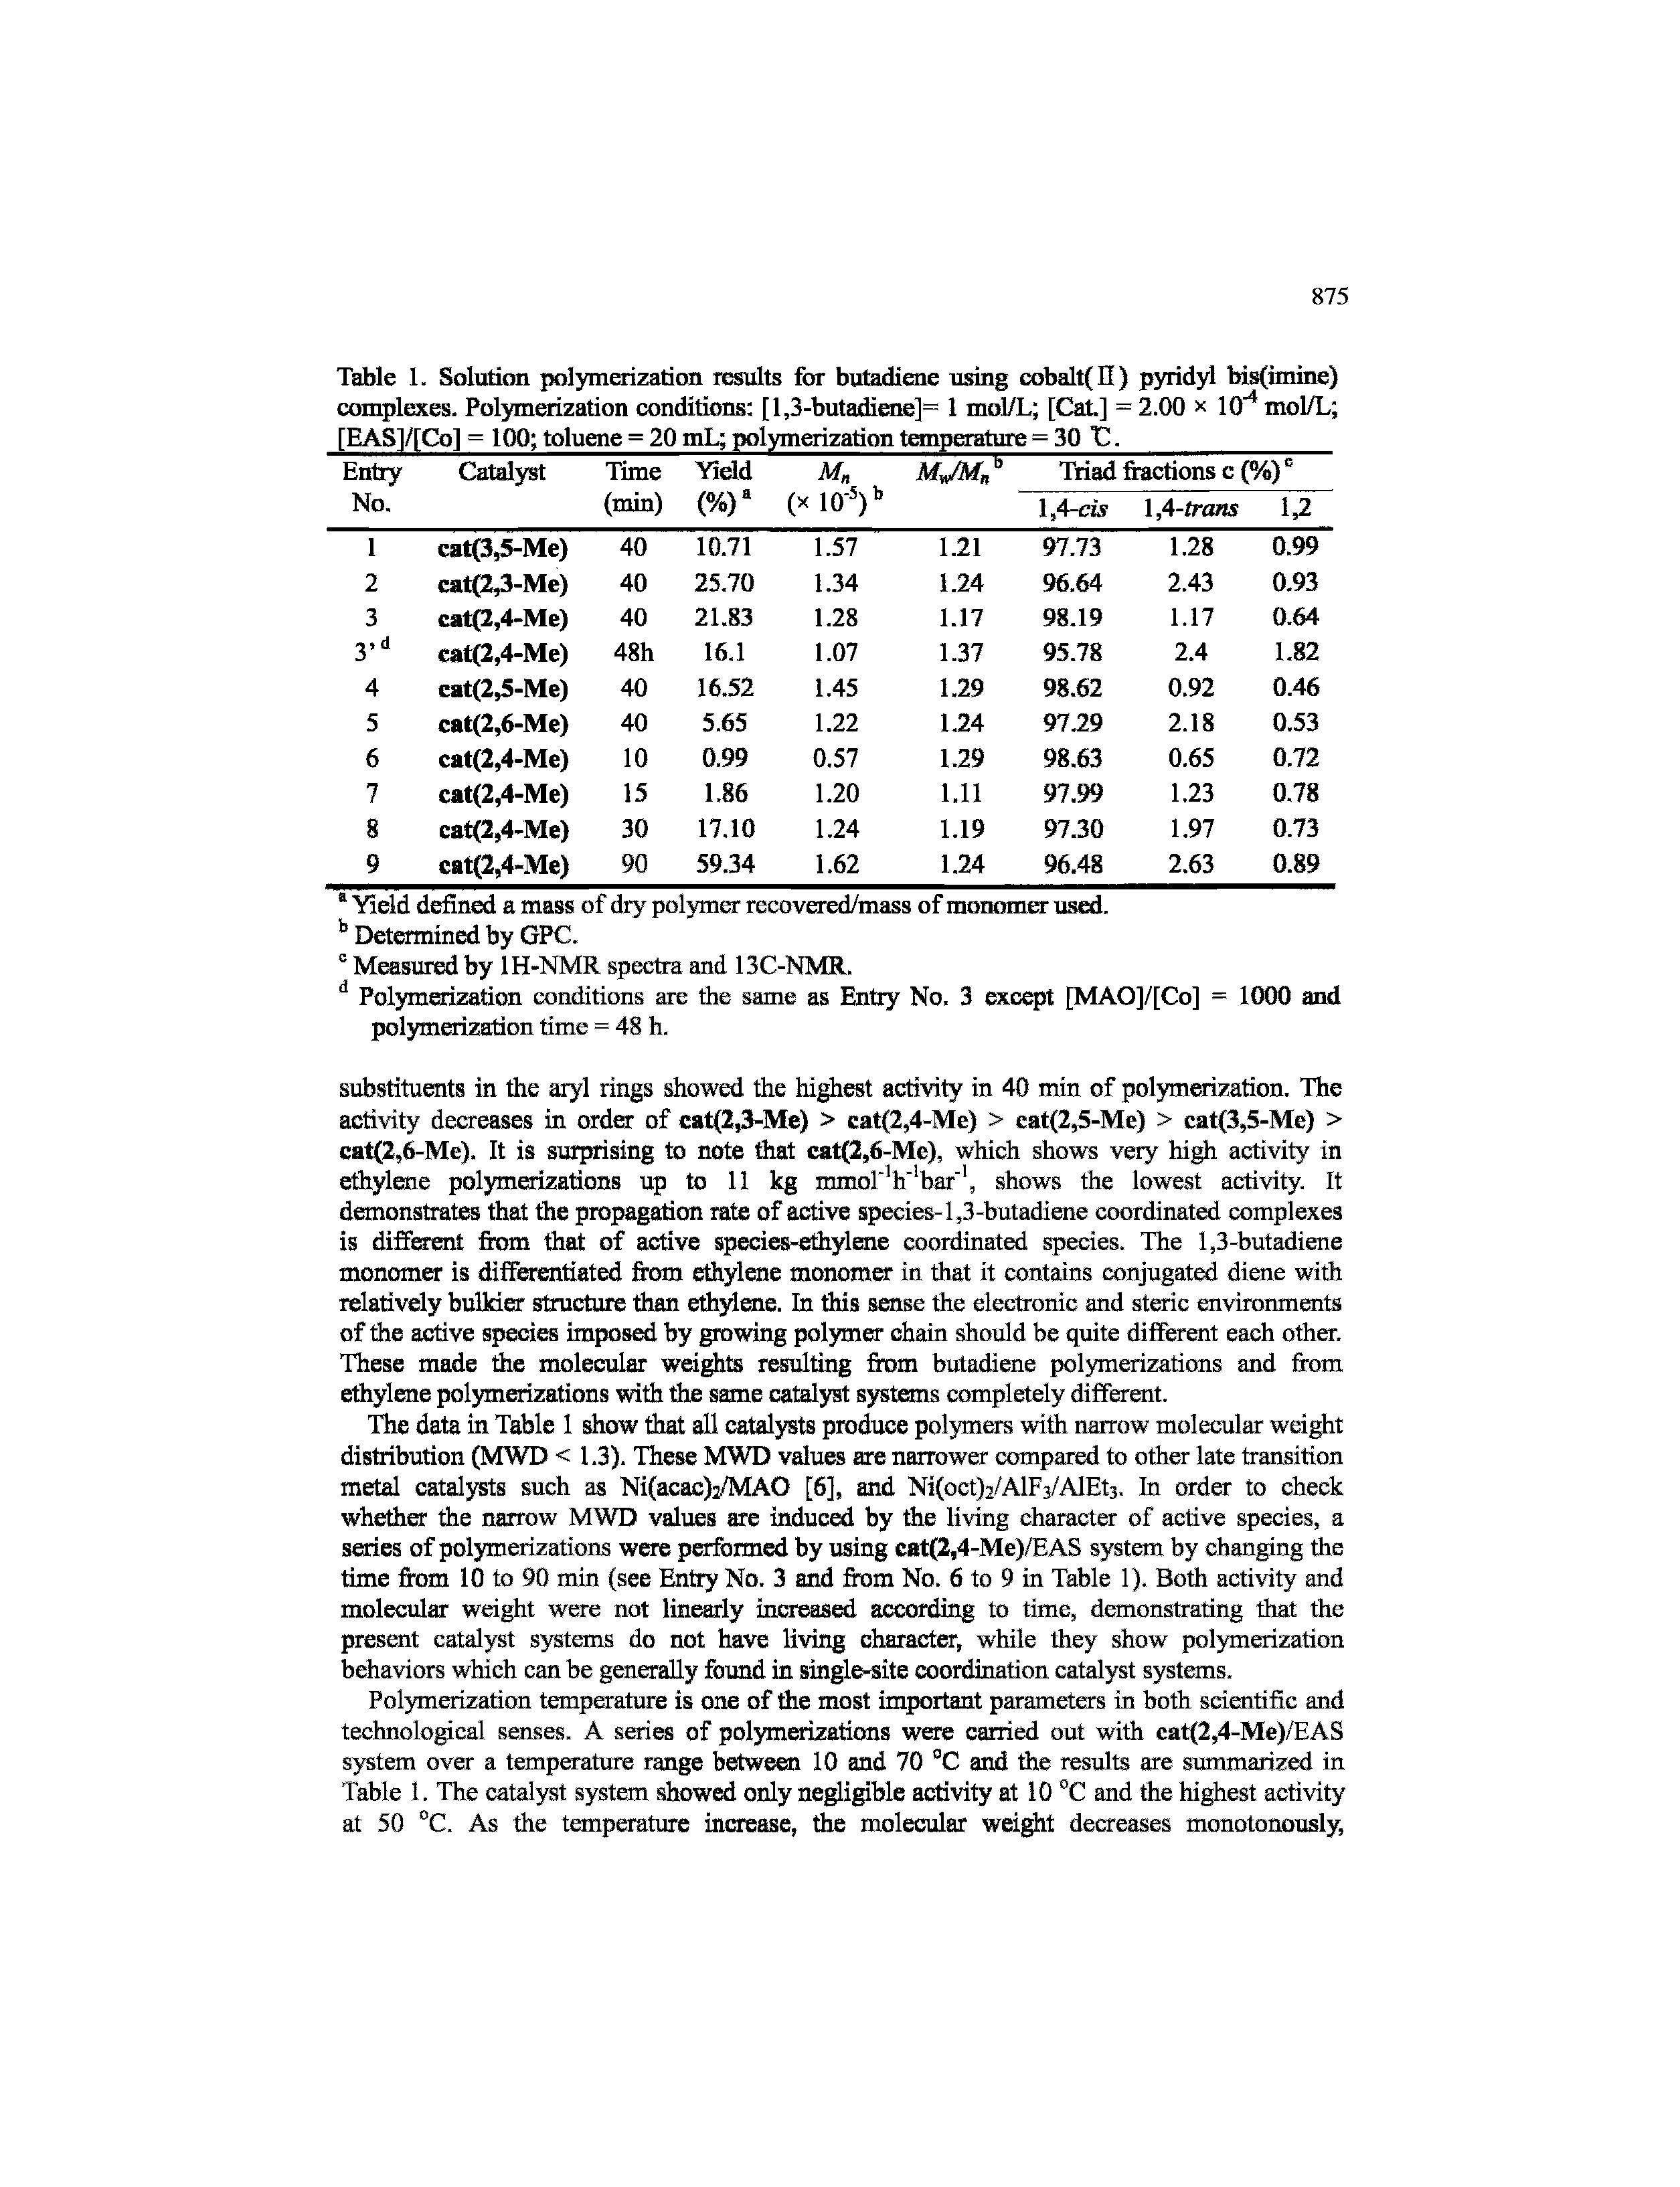 Table 1. Solution polymerization results for butadiene usir cobalt(II) pyridyl bis(imine) complexes. Polymerization conditions [l,3-butadiaie]= 1 mol/L [Cal.] = 2.00 x 10" mol/L ...